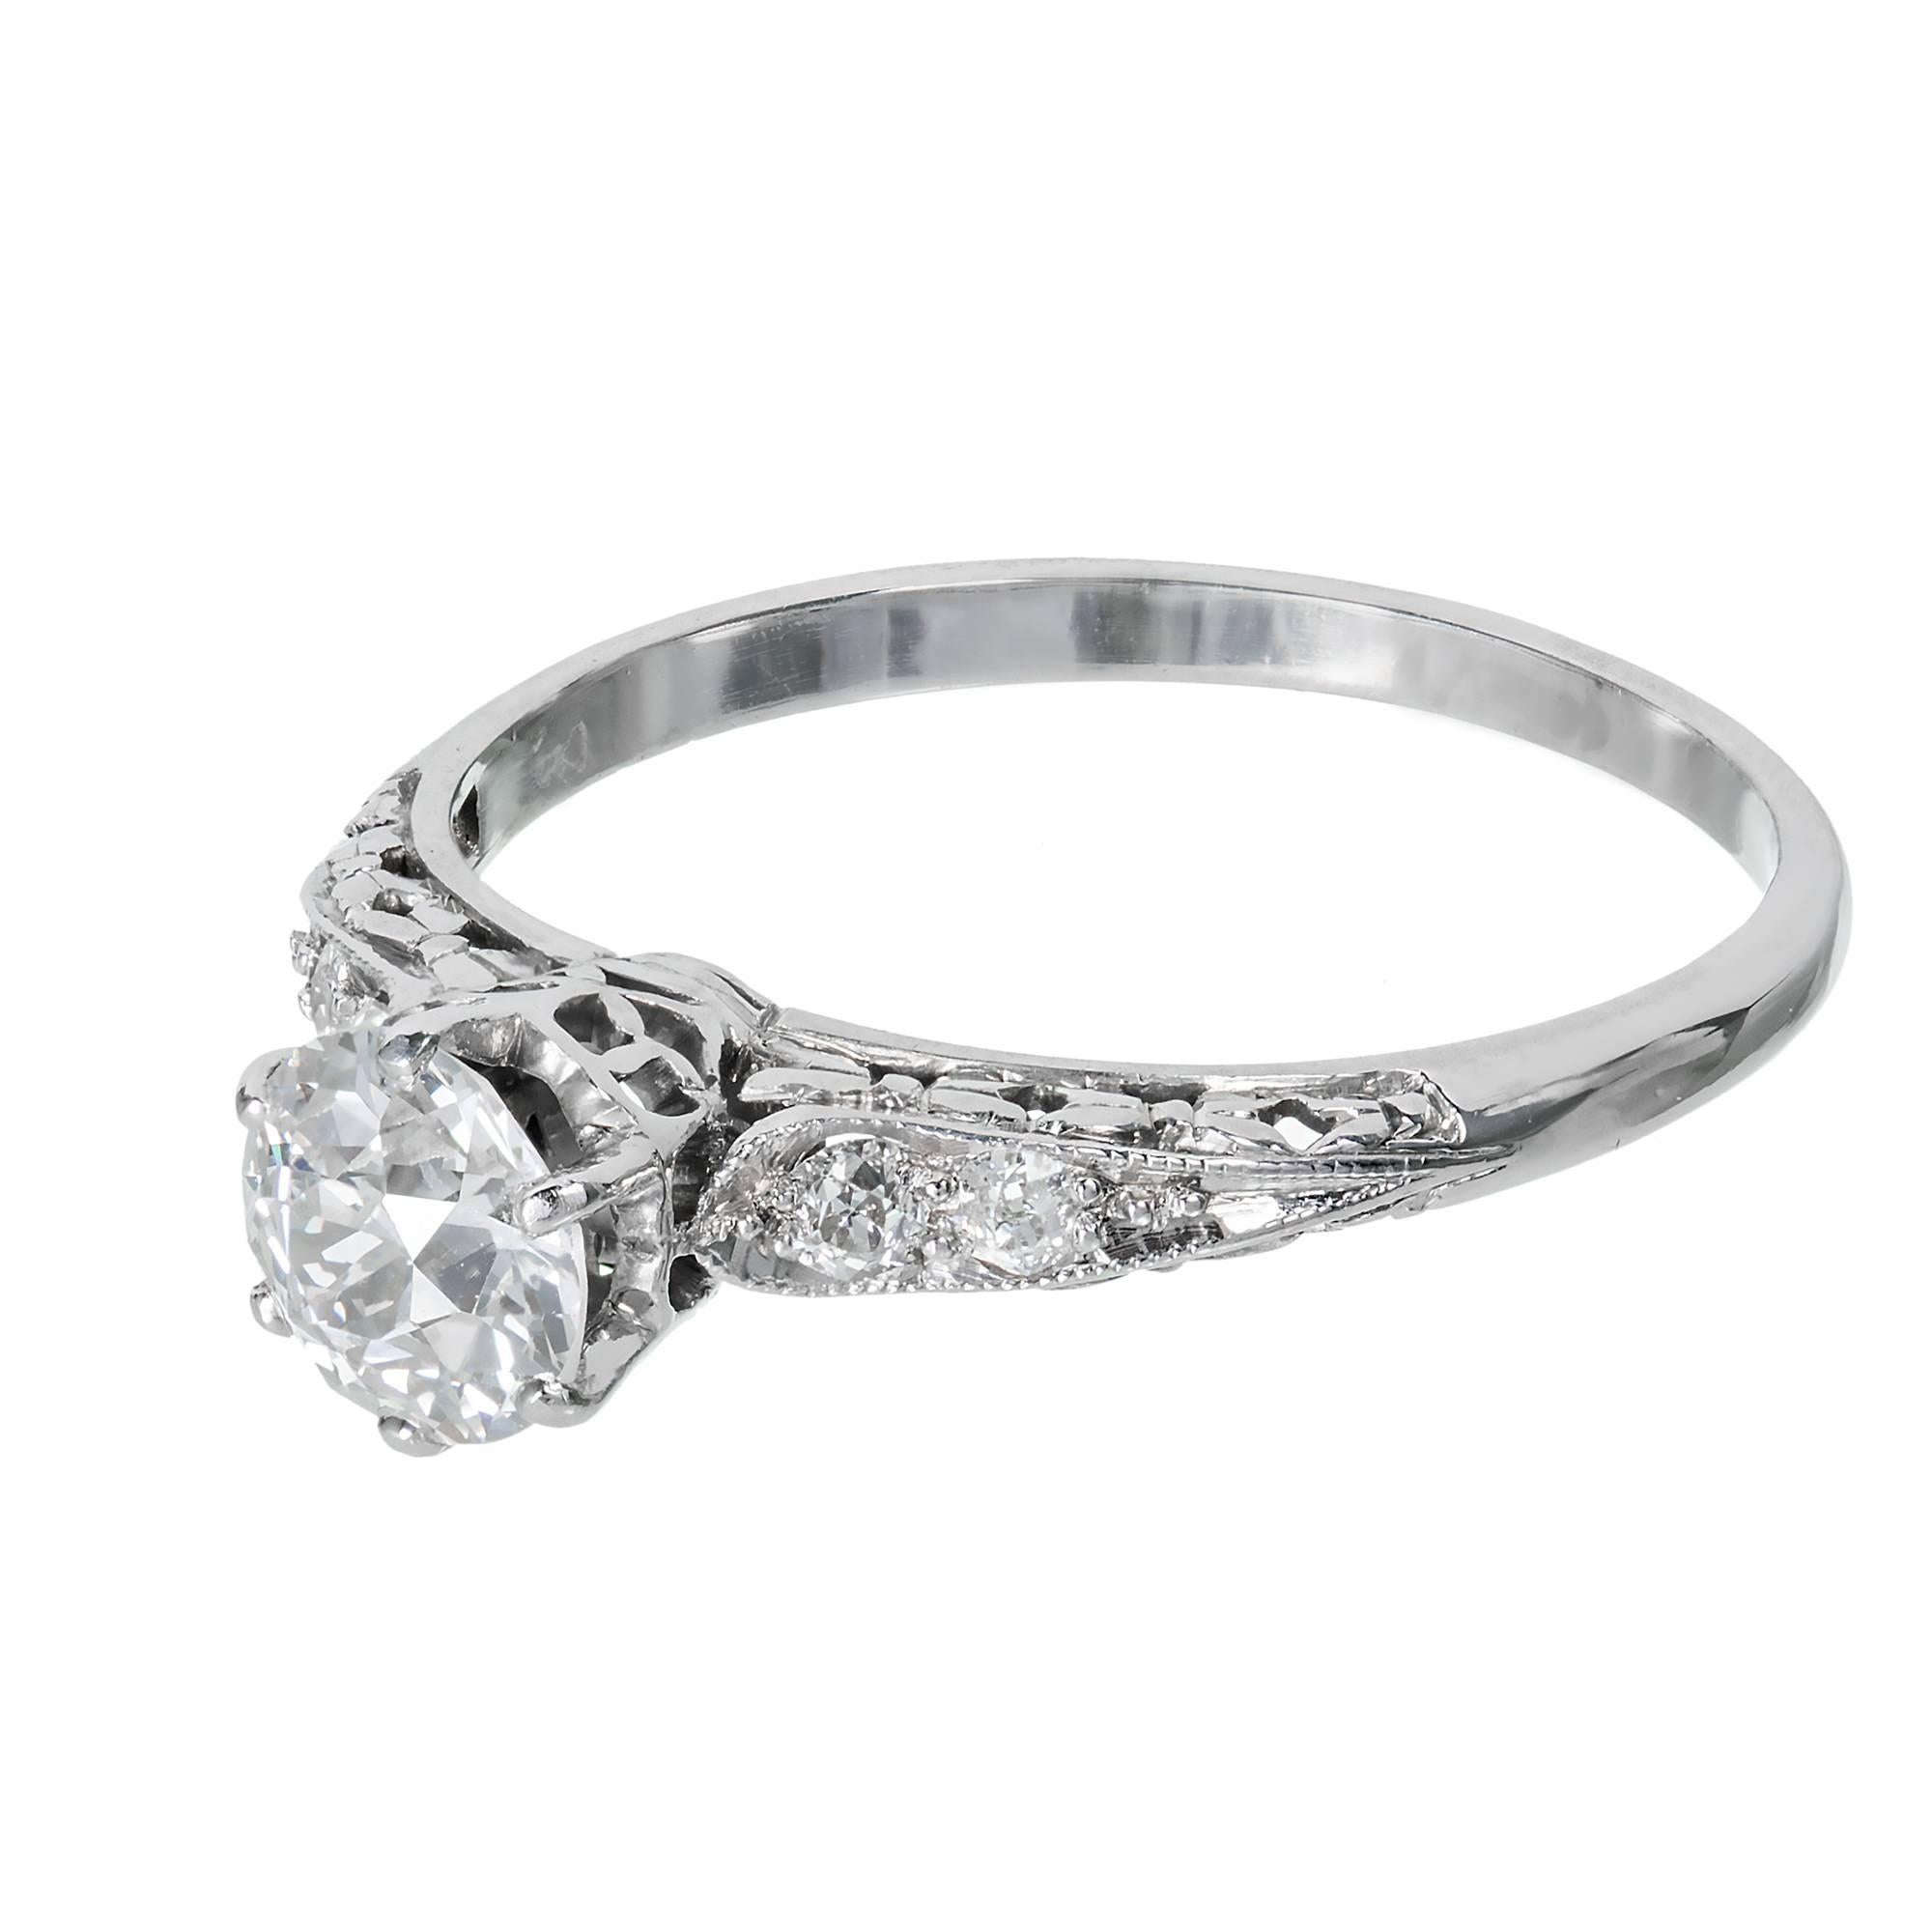 Original vintage filigree engagement ring, in a handmade platinum setting.  GIA certified diamonds, bright and sparkly. Circa 1910.

1 Old European cut diamond H VS2 approximately .70 carats.  GIA Certificate # 2185227774
4 Old European cut diamonds